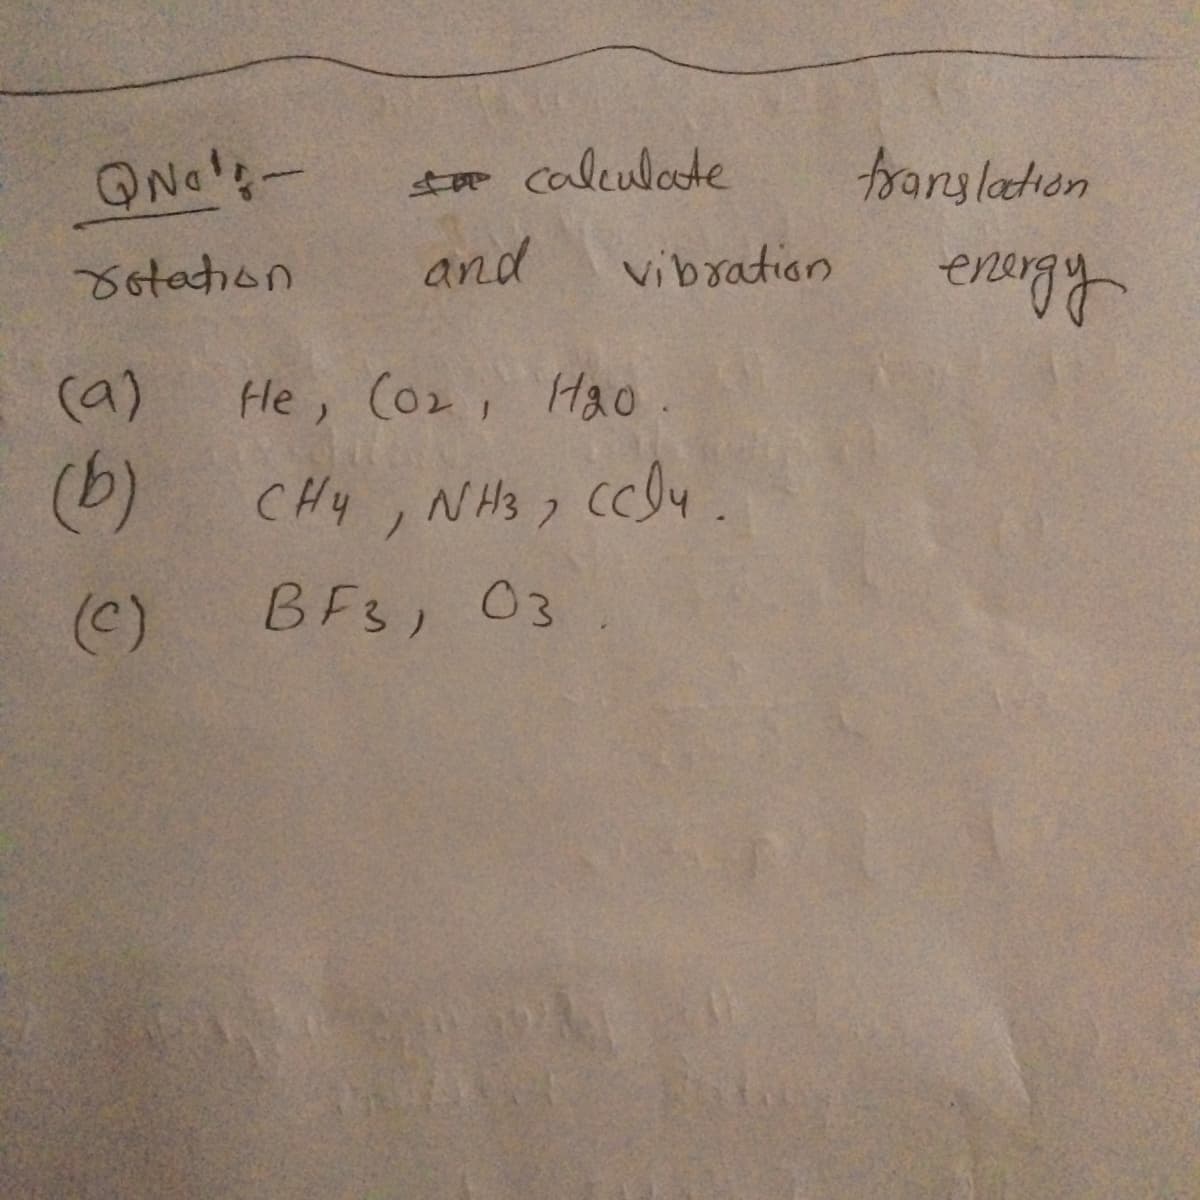 QNo¹-
rotation
(9)
(b)
(c)
to calculate
and
vibration
He, (0₂2, Hao.
CH4, NH3, CCD4.
севи.
BF3, 03
translation
energy